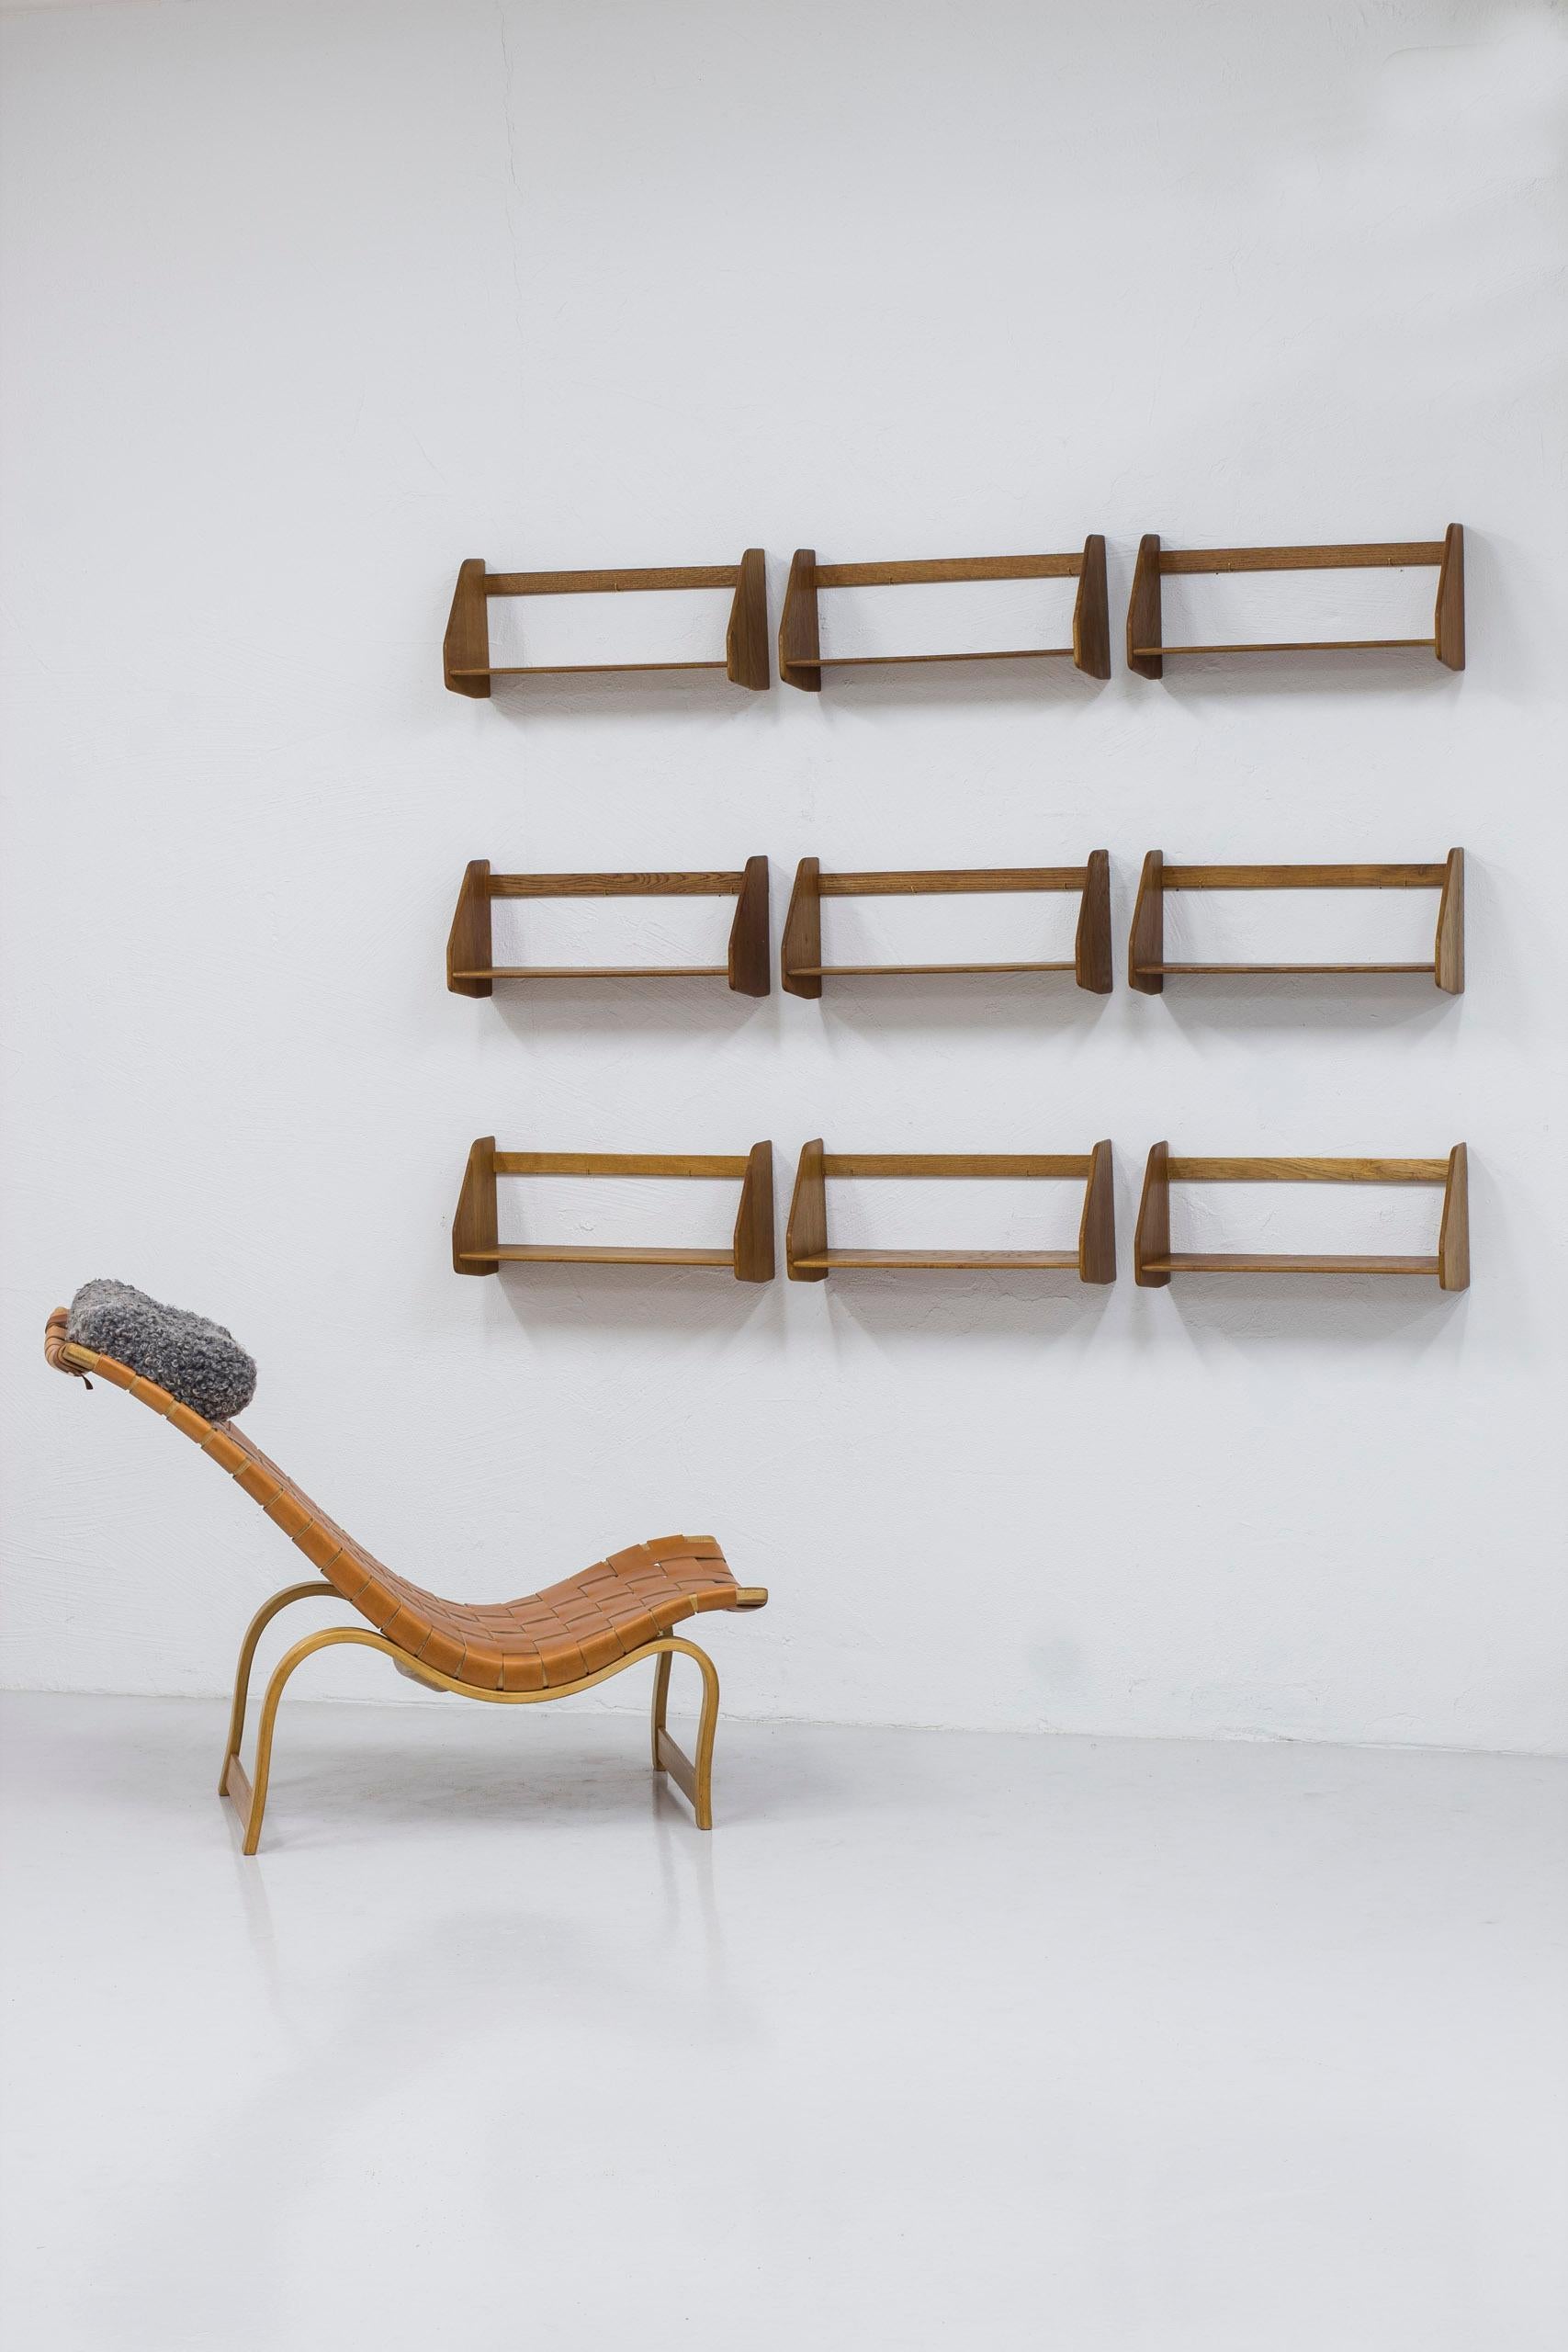 Set of nine shelves model RY21 designed by Hans J. Wegner. Produced in Denmark by RY Møbler during the 1950s. Made from solid oiled oak. The back pieces have not been screwed through which is very common. Instead the shelf is hung on small brass